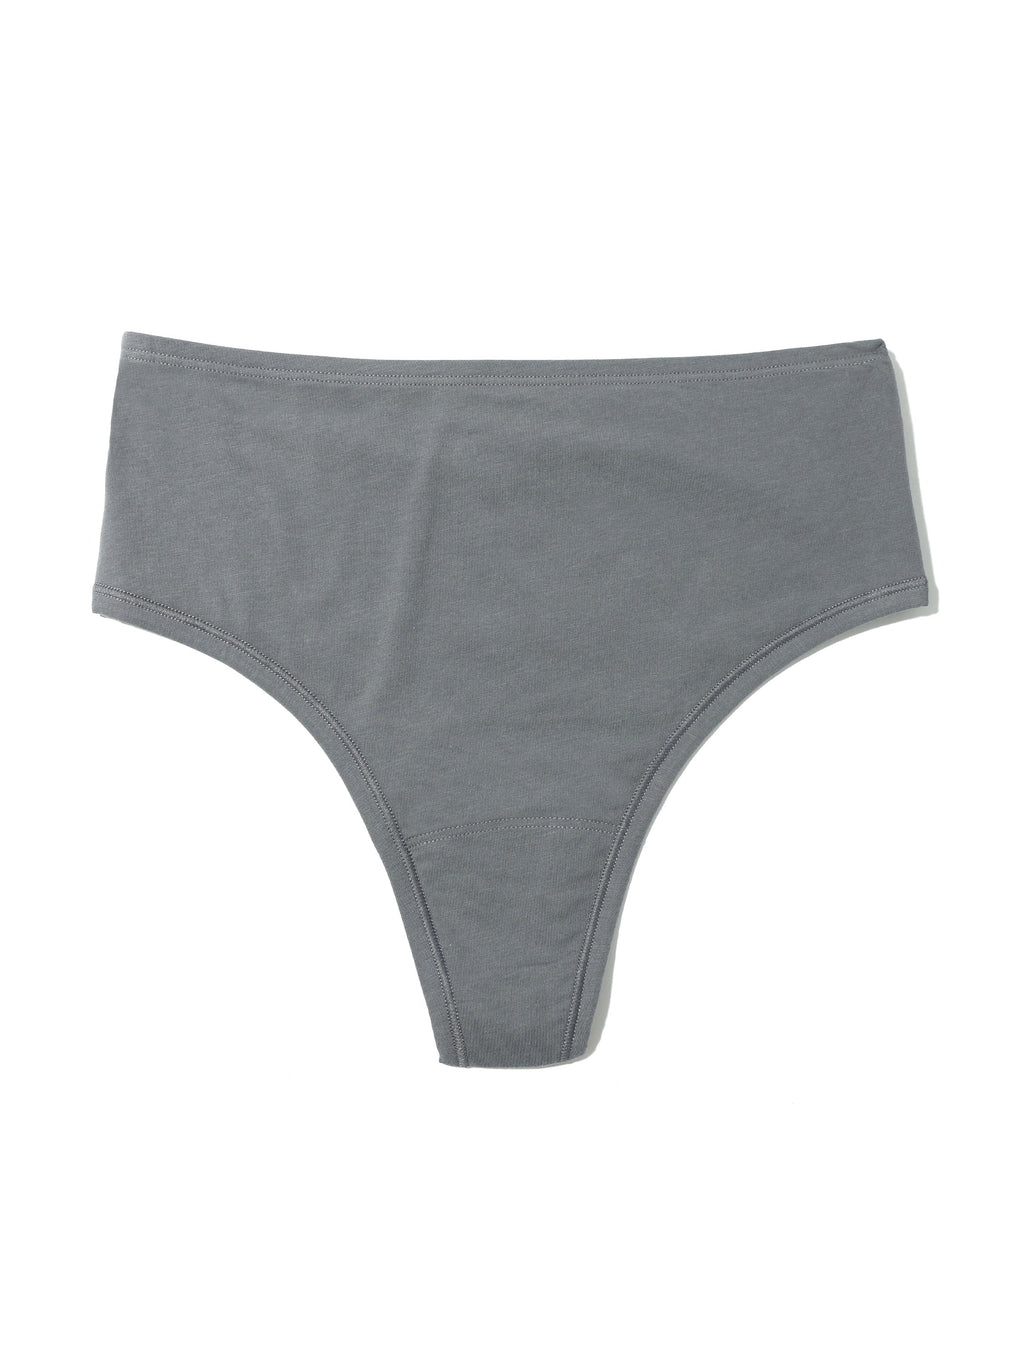 Grey Cotton Knotty Banded Thong